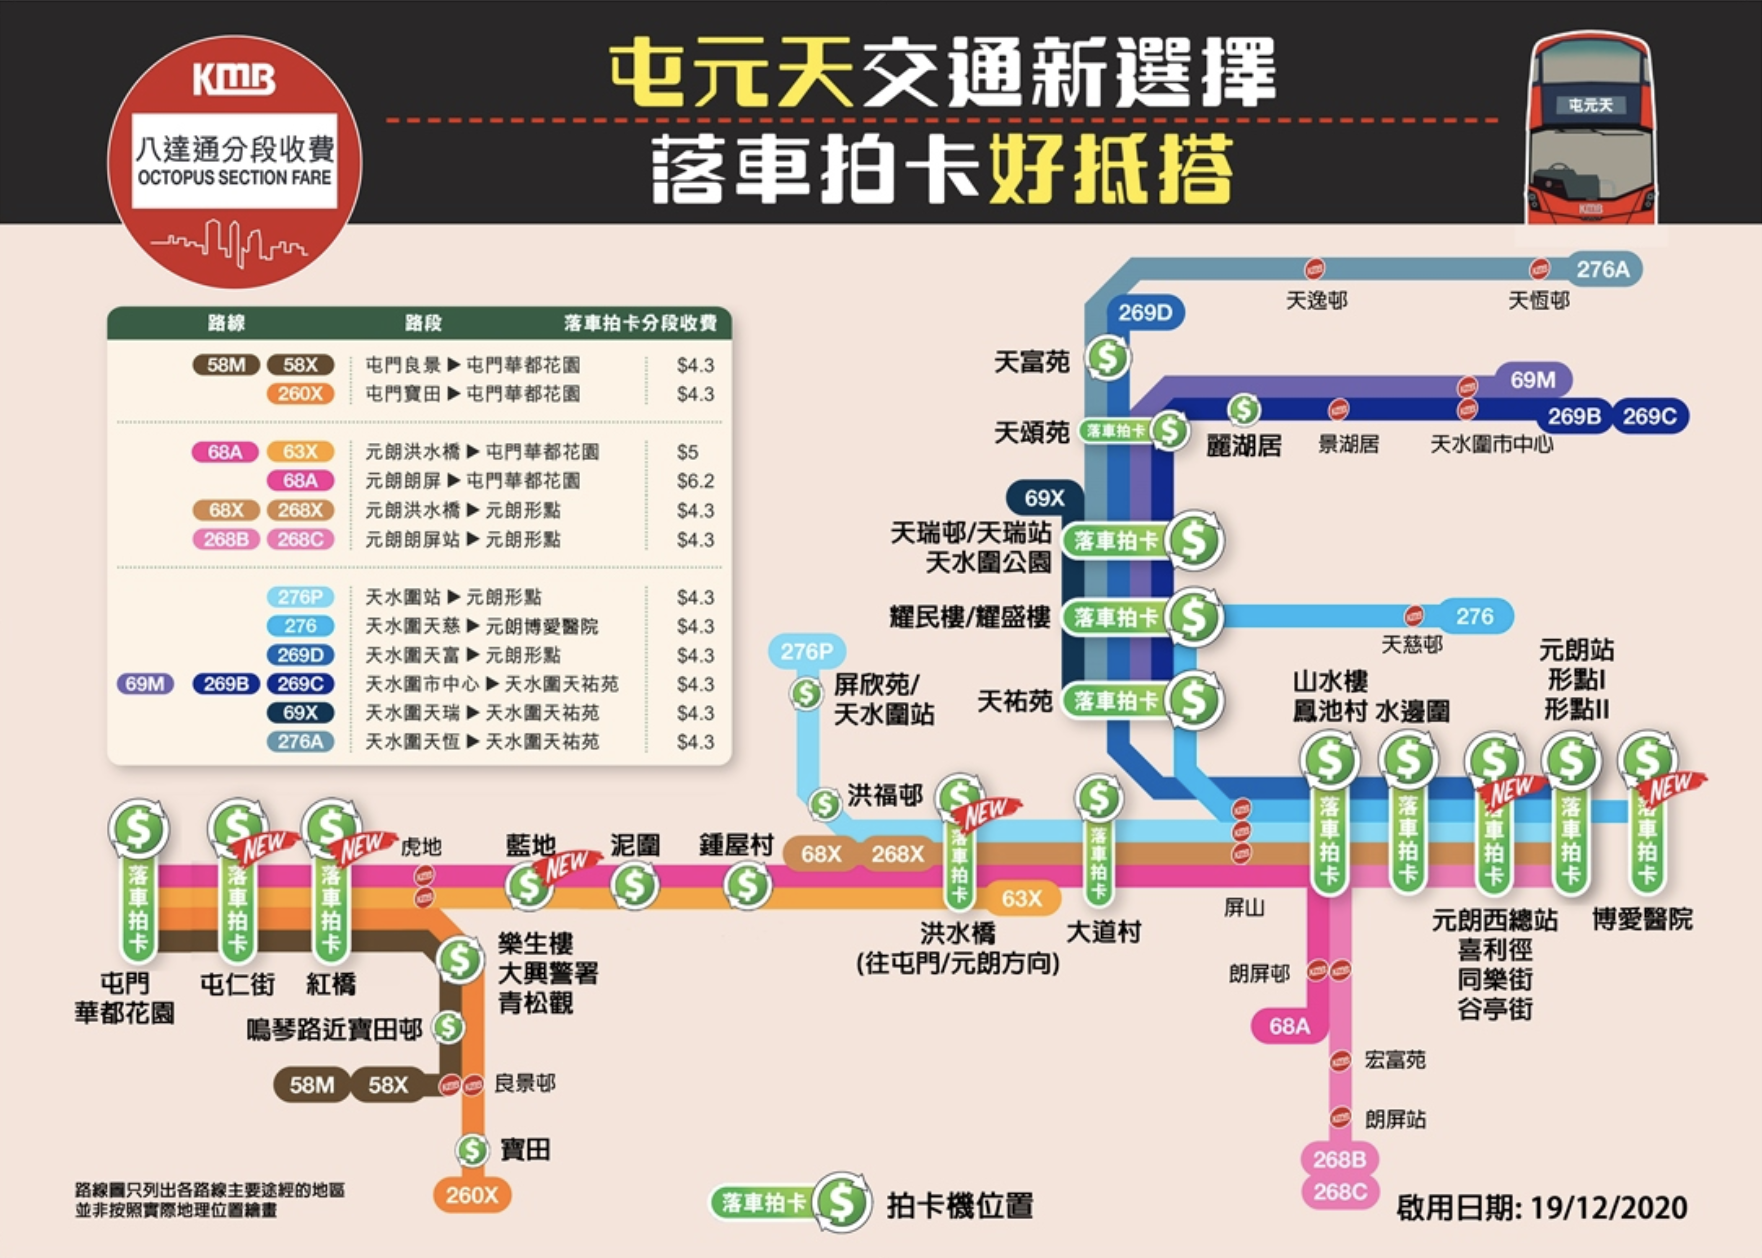 KMB Section Fare Machine Map.png